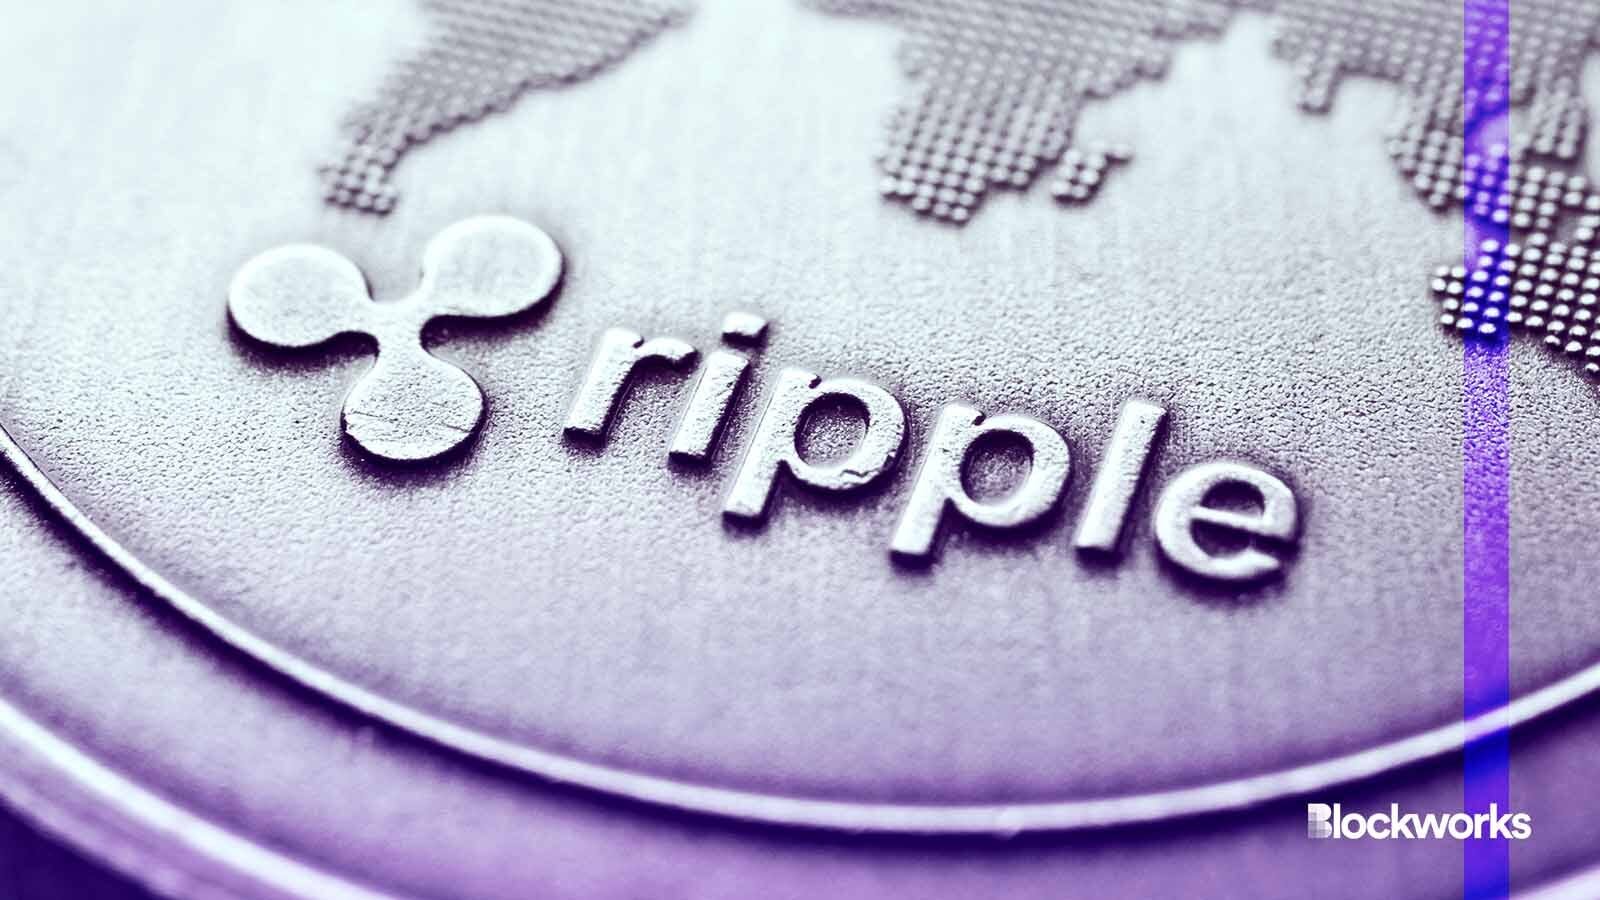 Crypto firm Ripple considers relocating to London over U.S. regulation